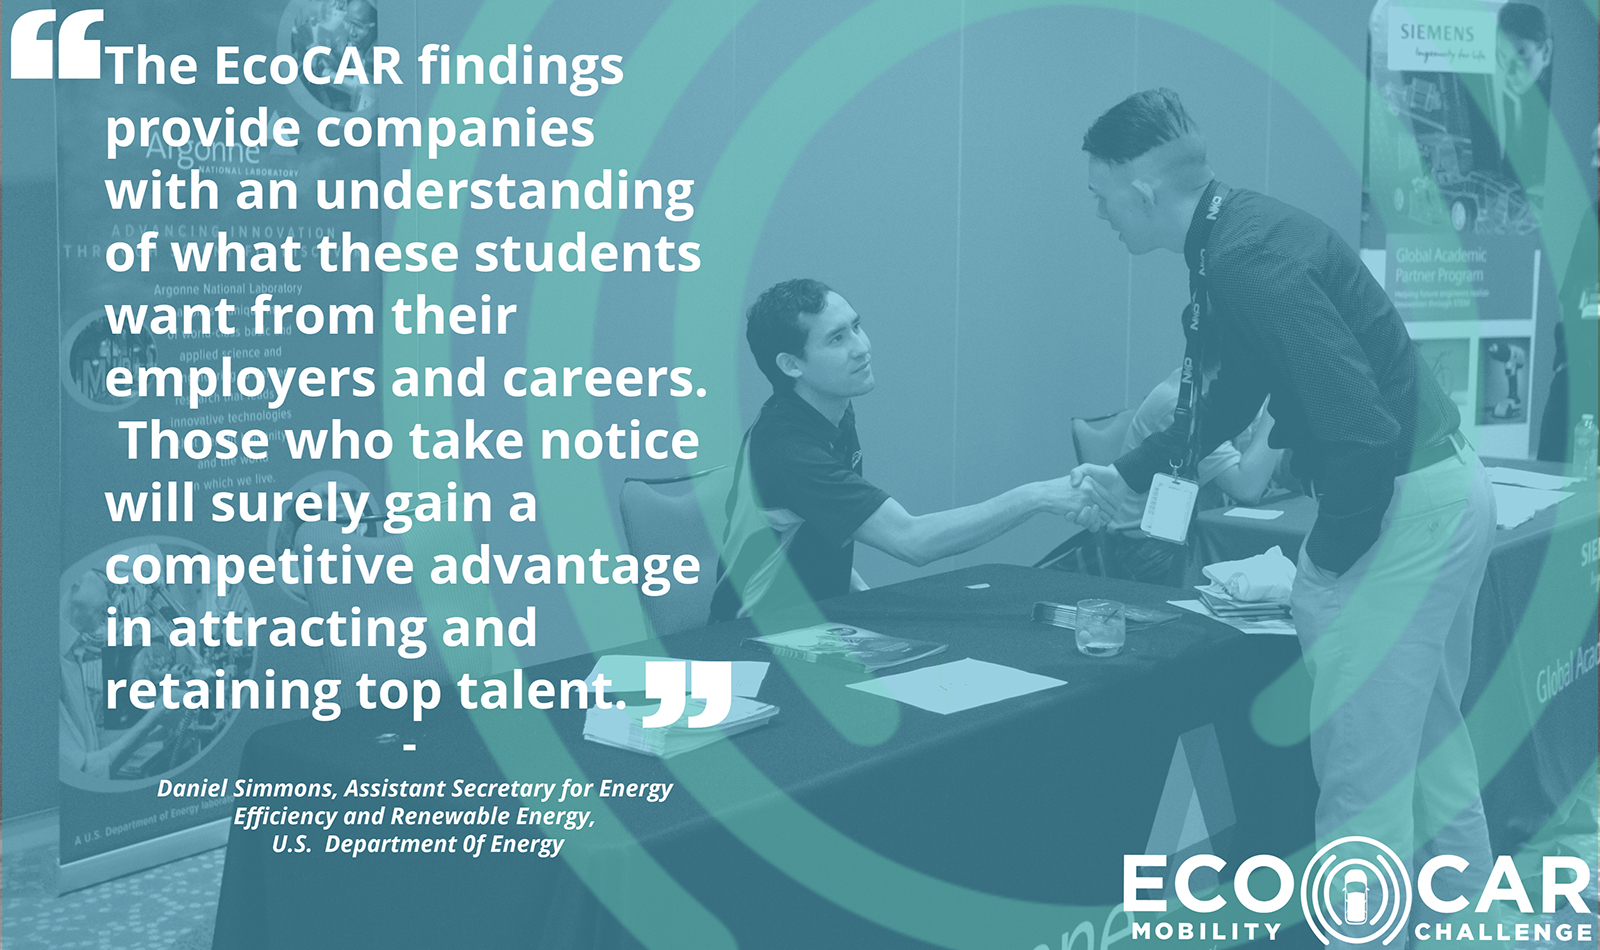 The EcoCAR findings provide companies with an understanding of what these students want from their employers and careers.